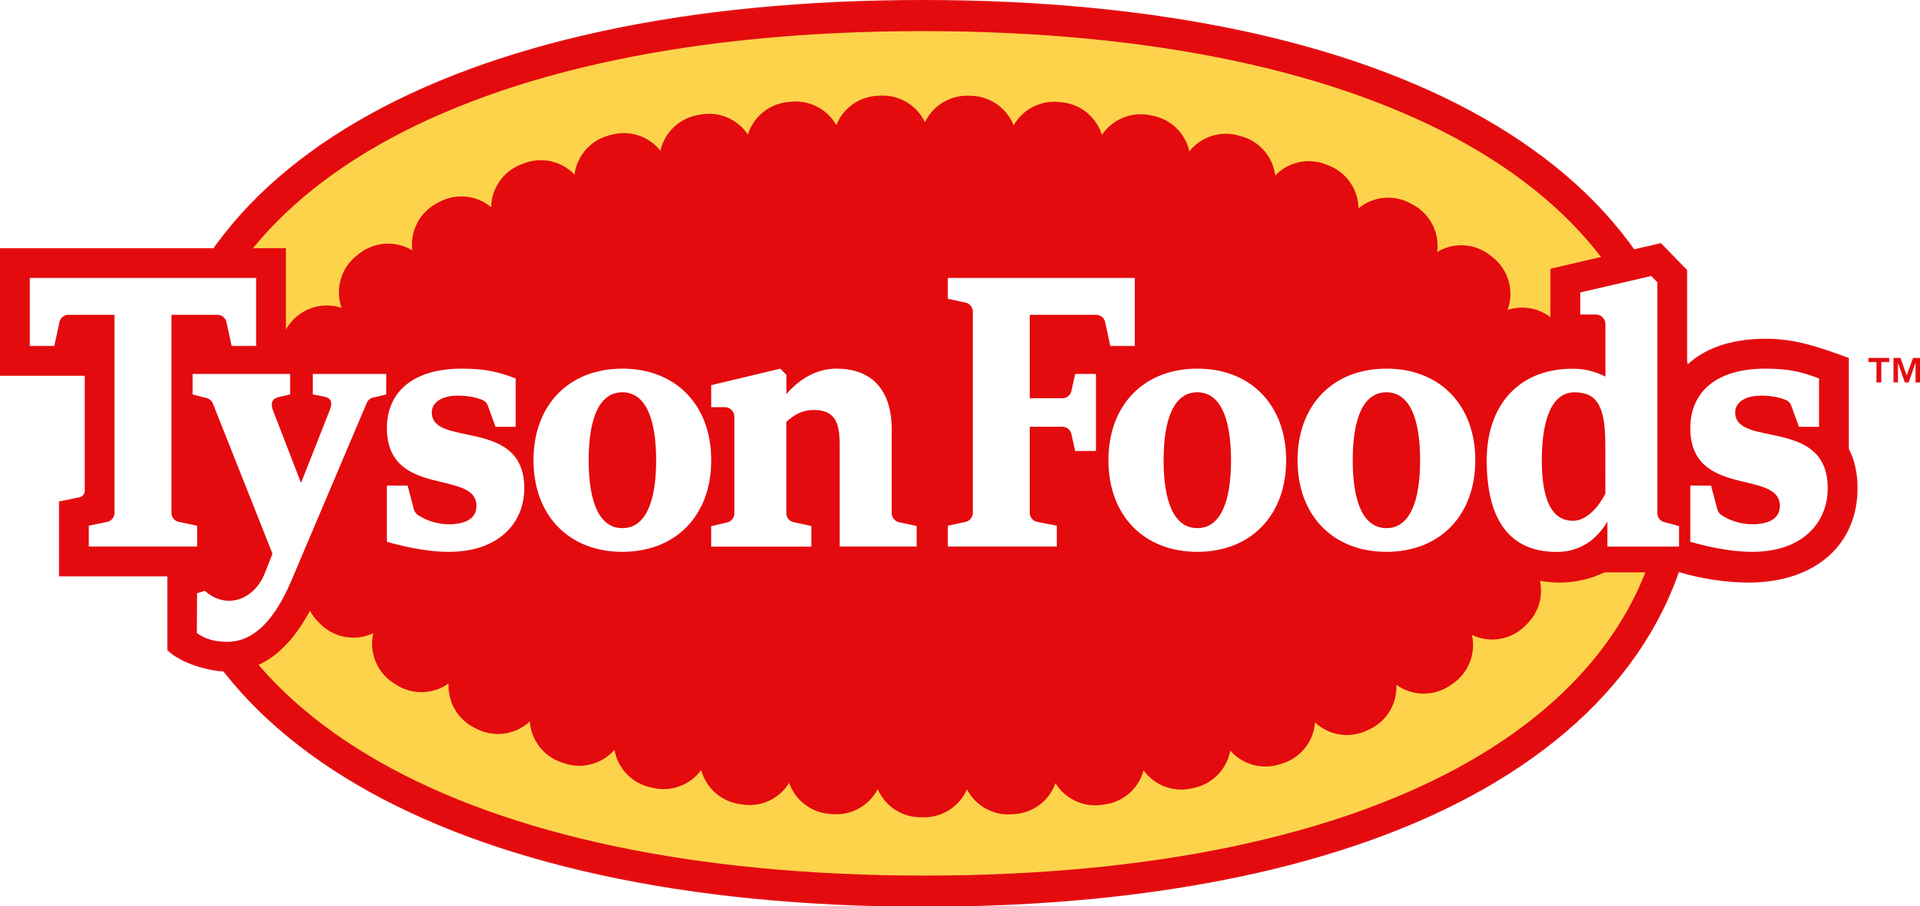 The tyson foods logo is red and yellow and looks like a football.